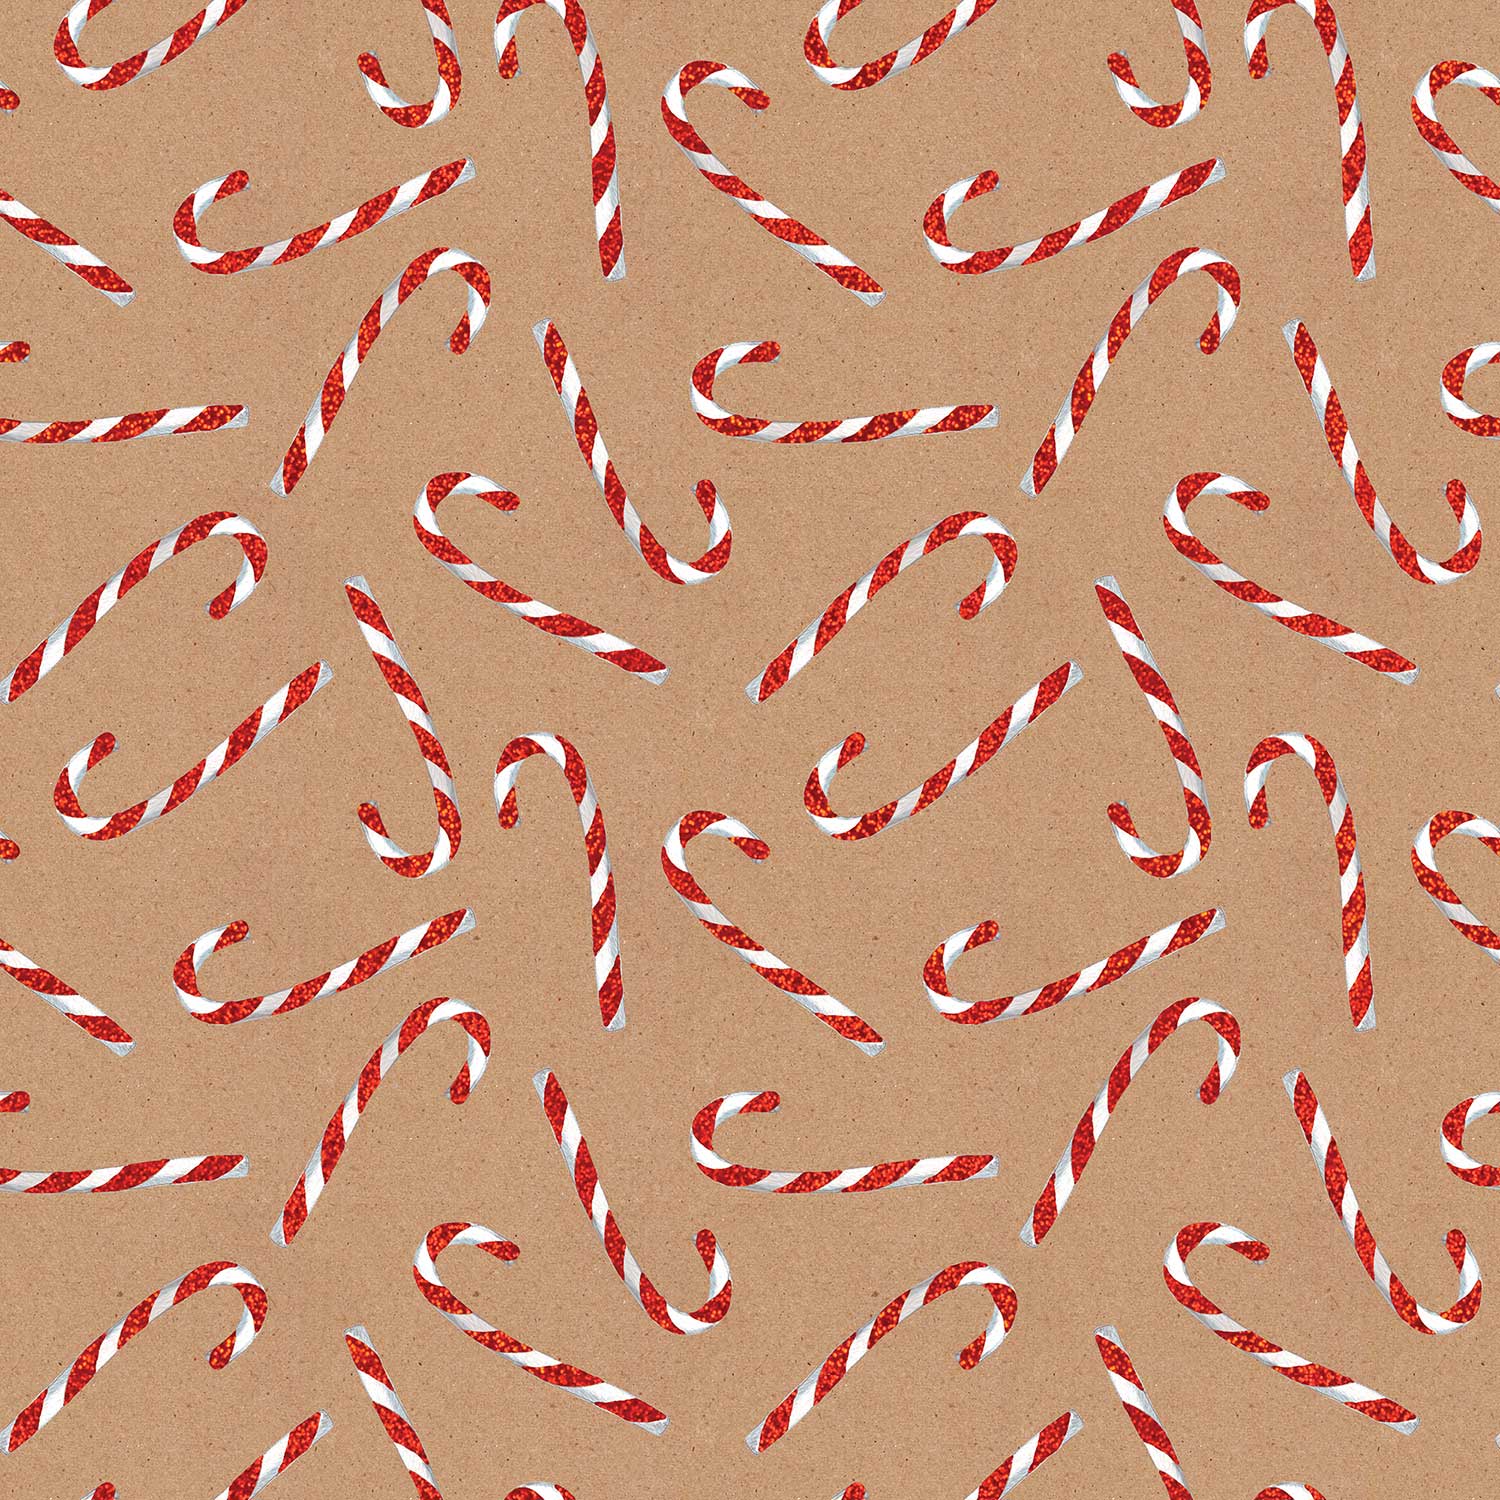 XB791a Candy Cane Christmas Gift Wrapping Paper Swatch 